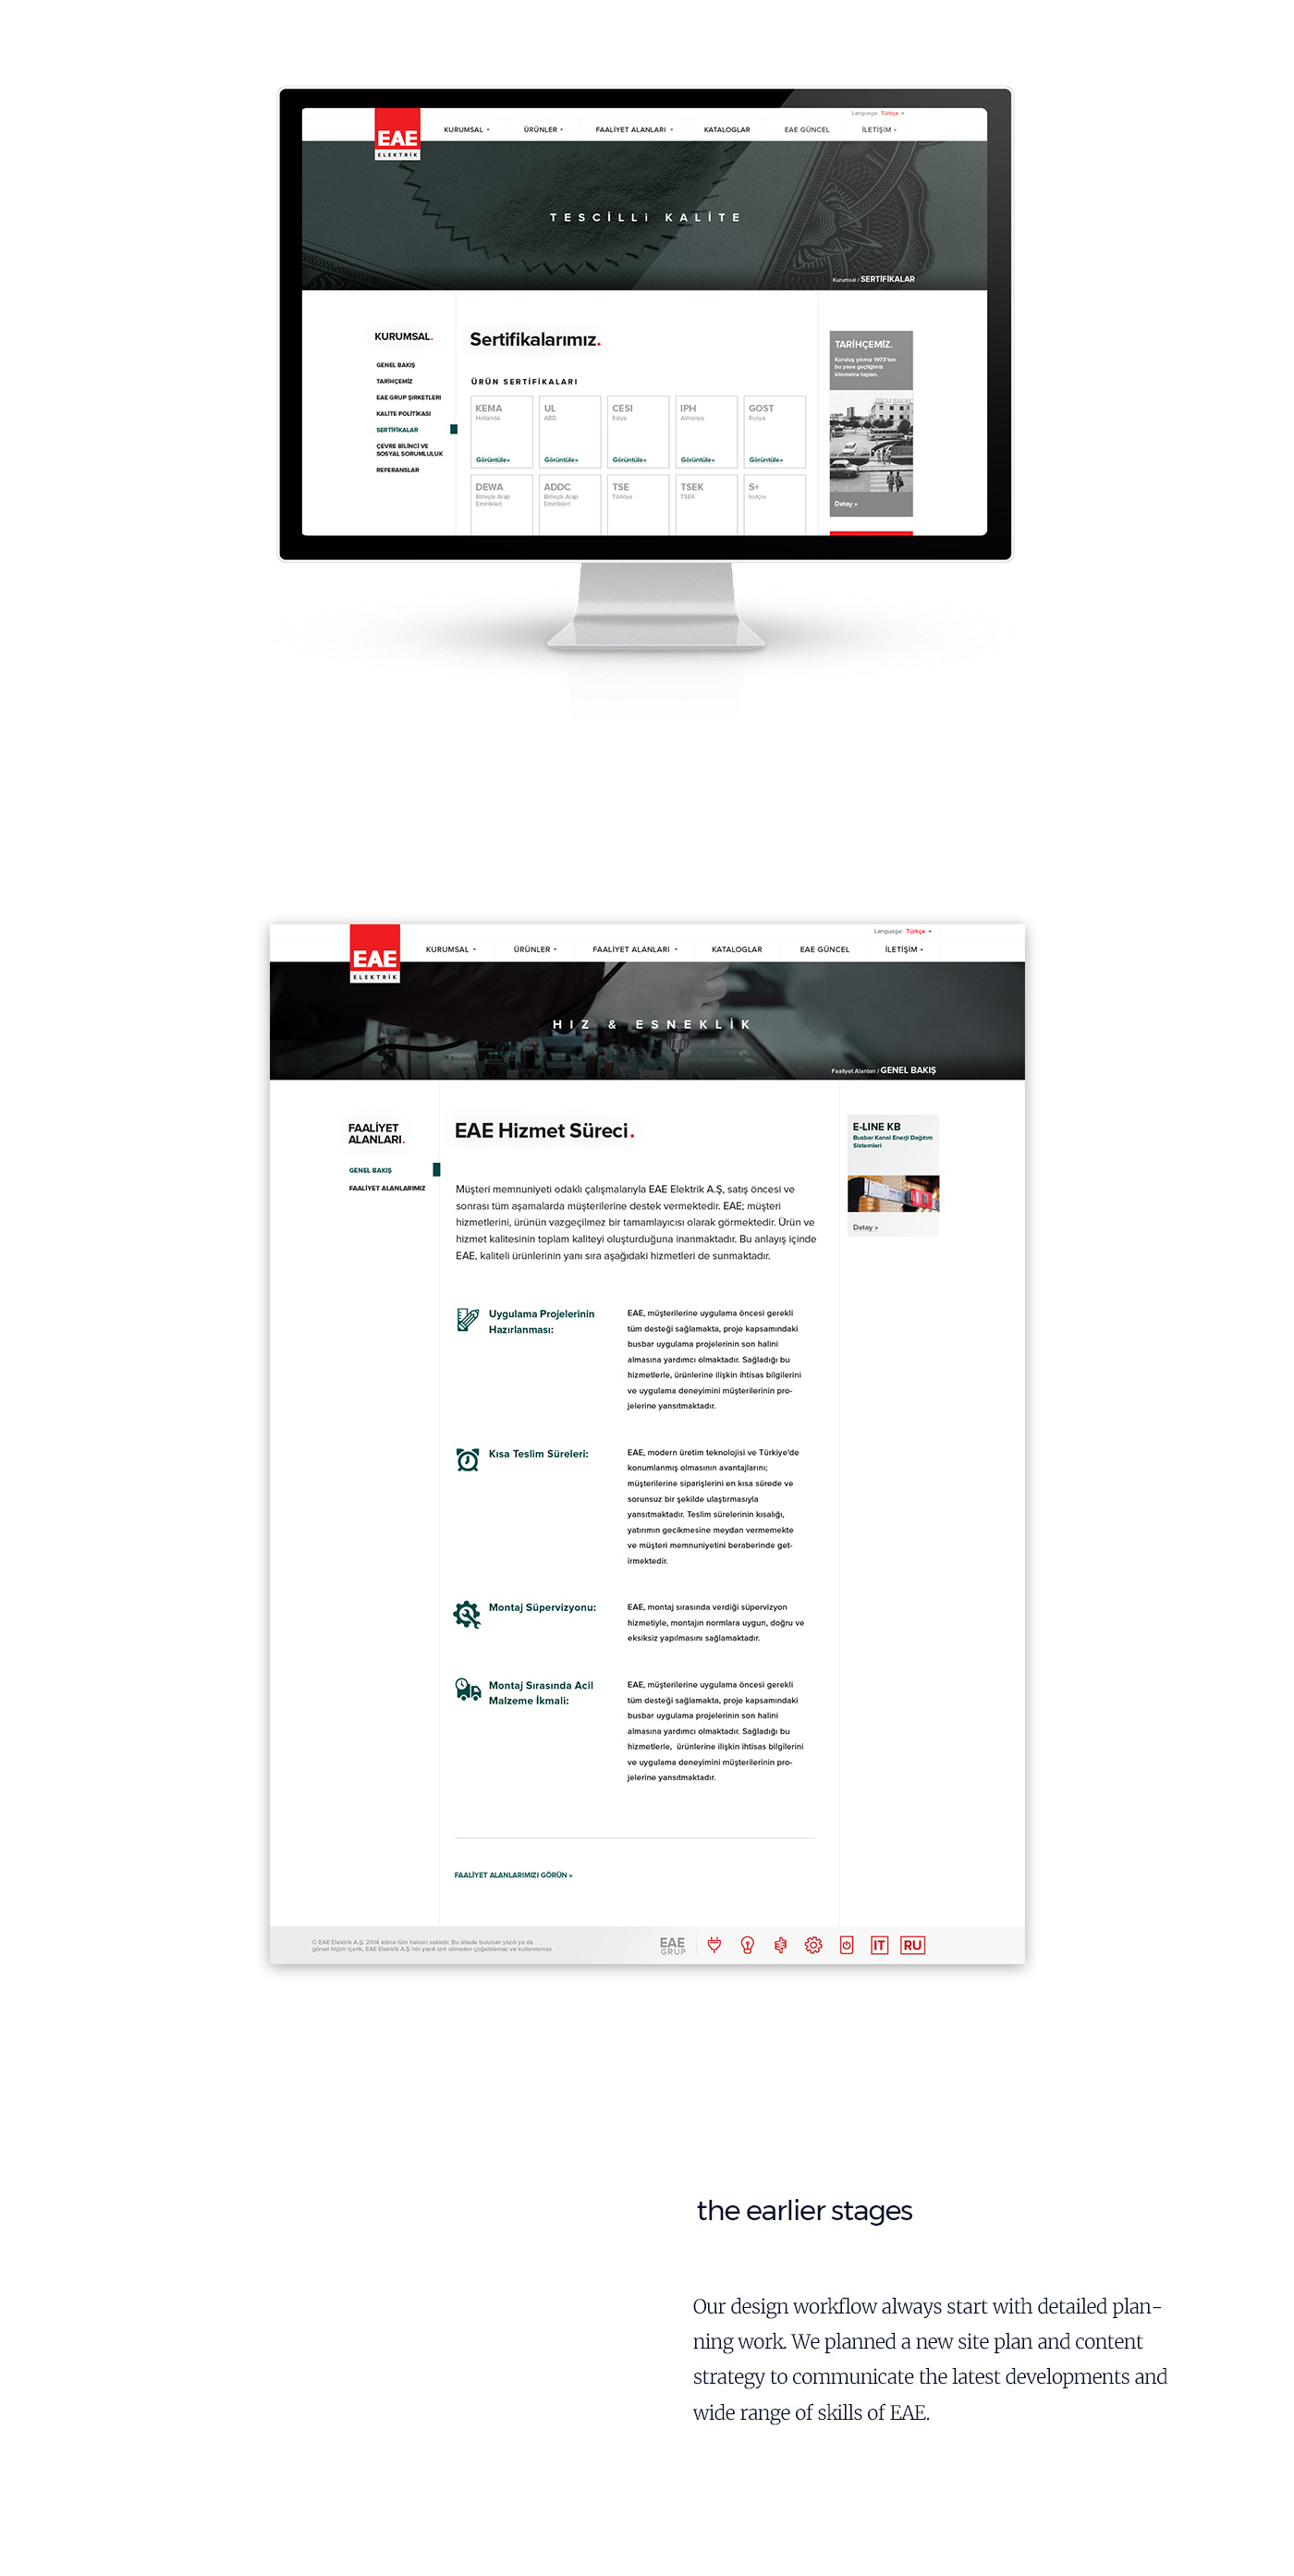 website redesign corporate website electricity company eae electricity UI / UX wireframing